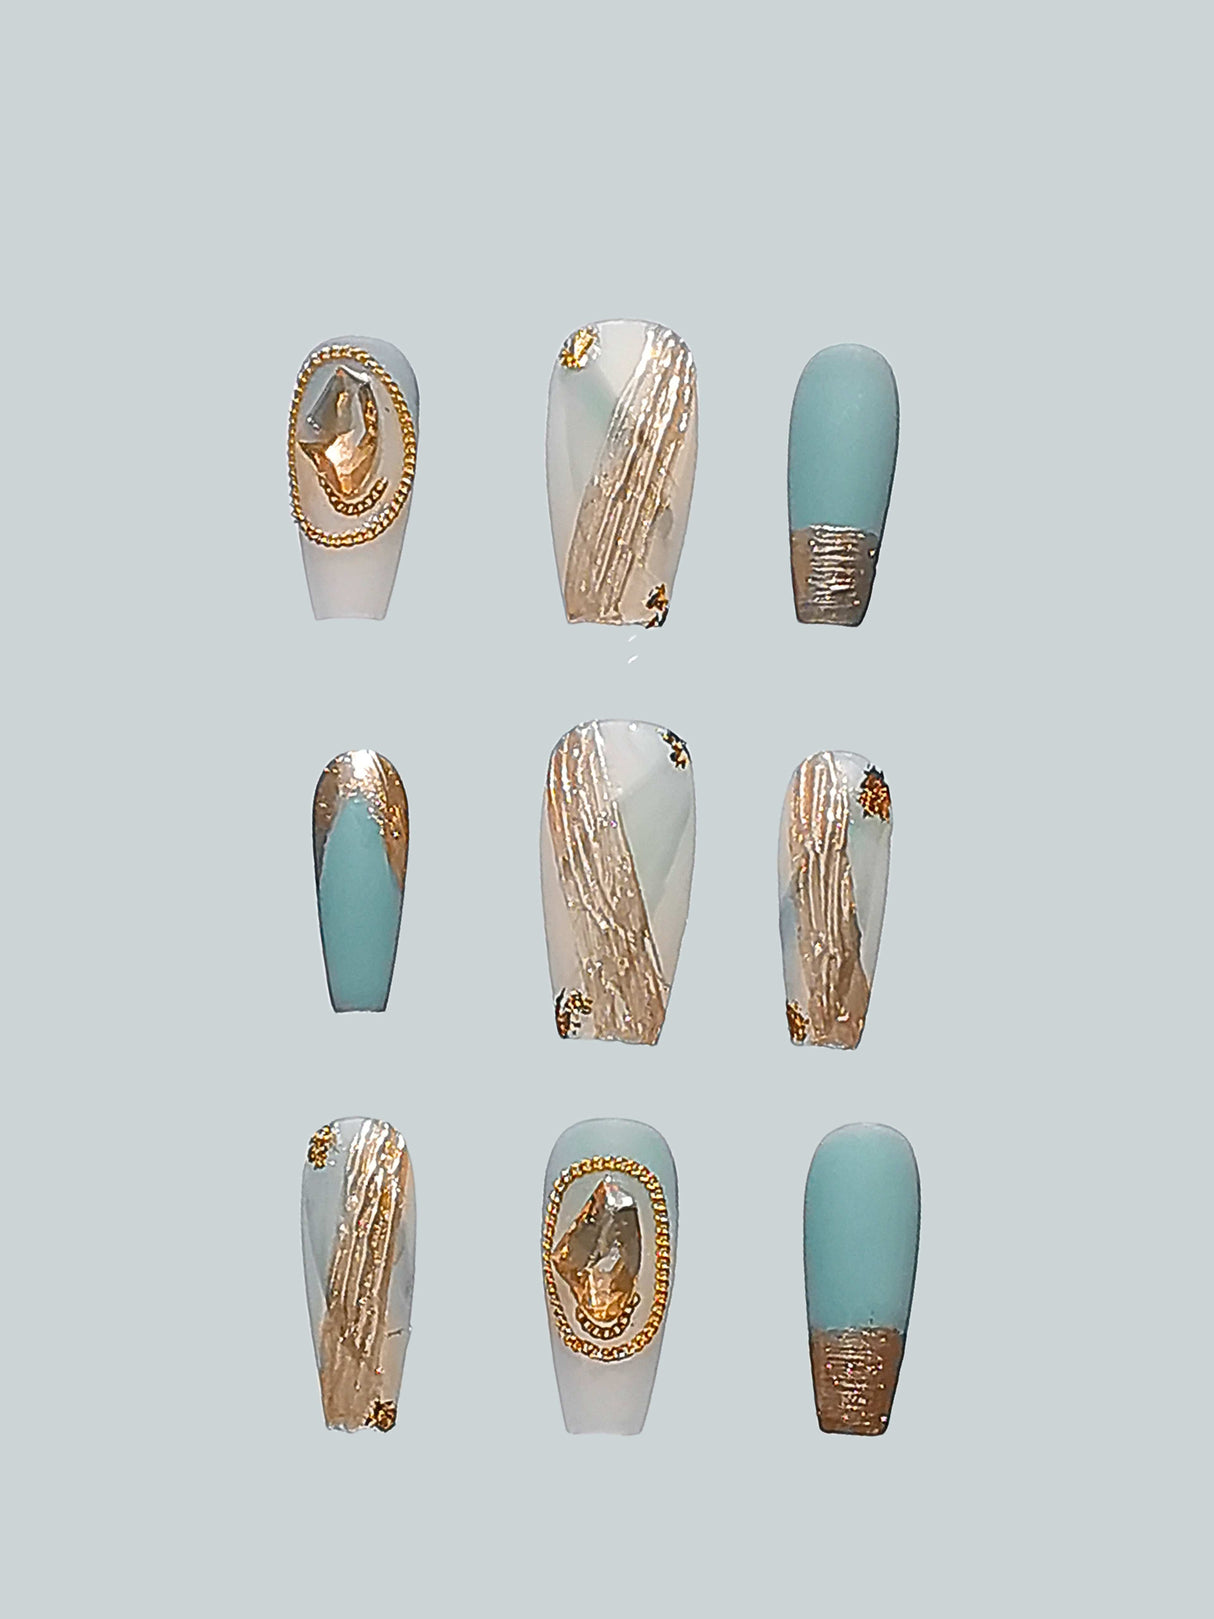 Elegant pastel blue, white, and gold accent nails with different lengths and shapes for customization. Perfect for special occasions or fashion statements.